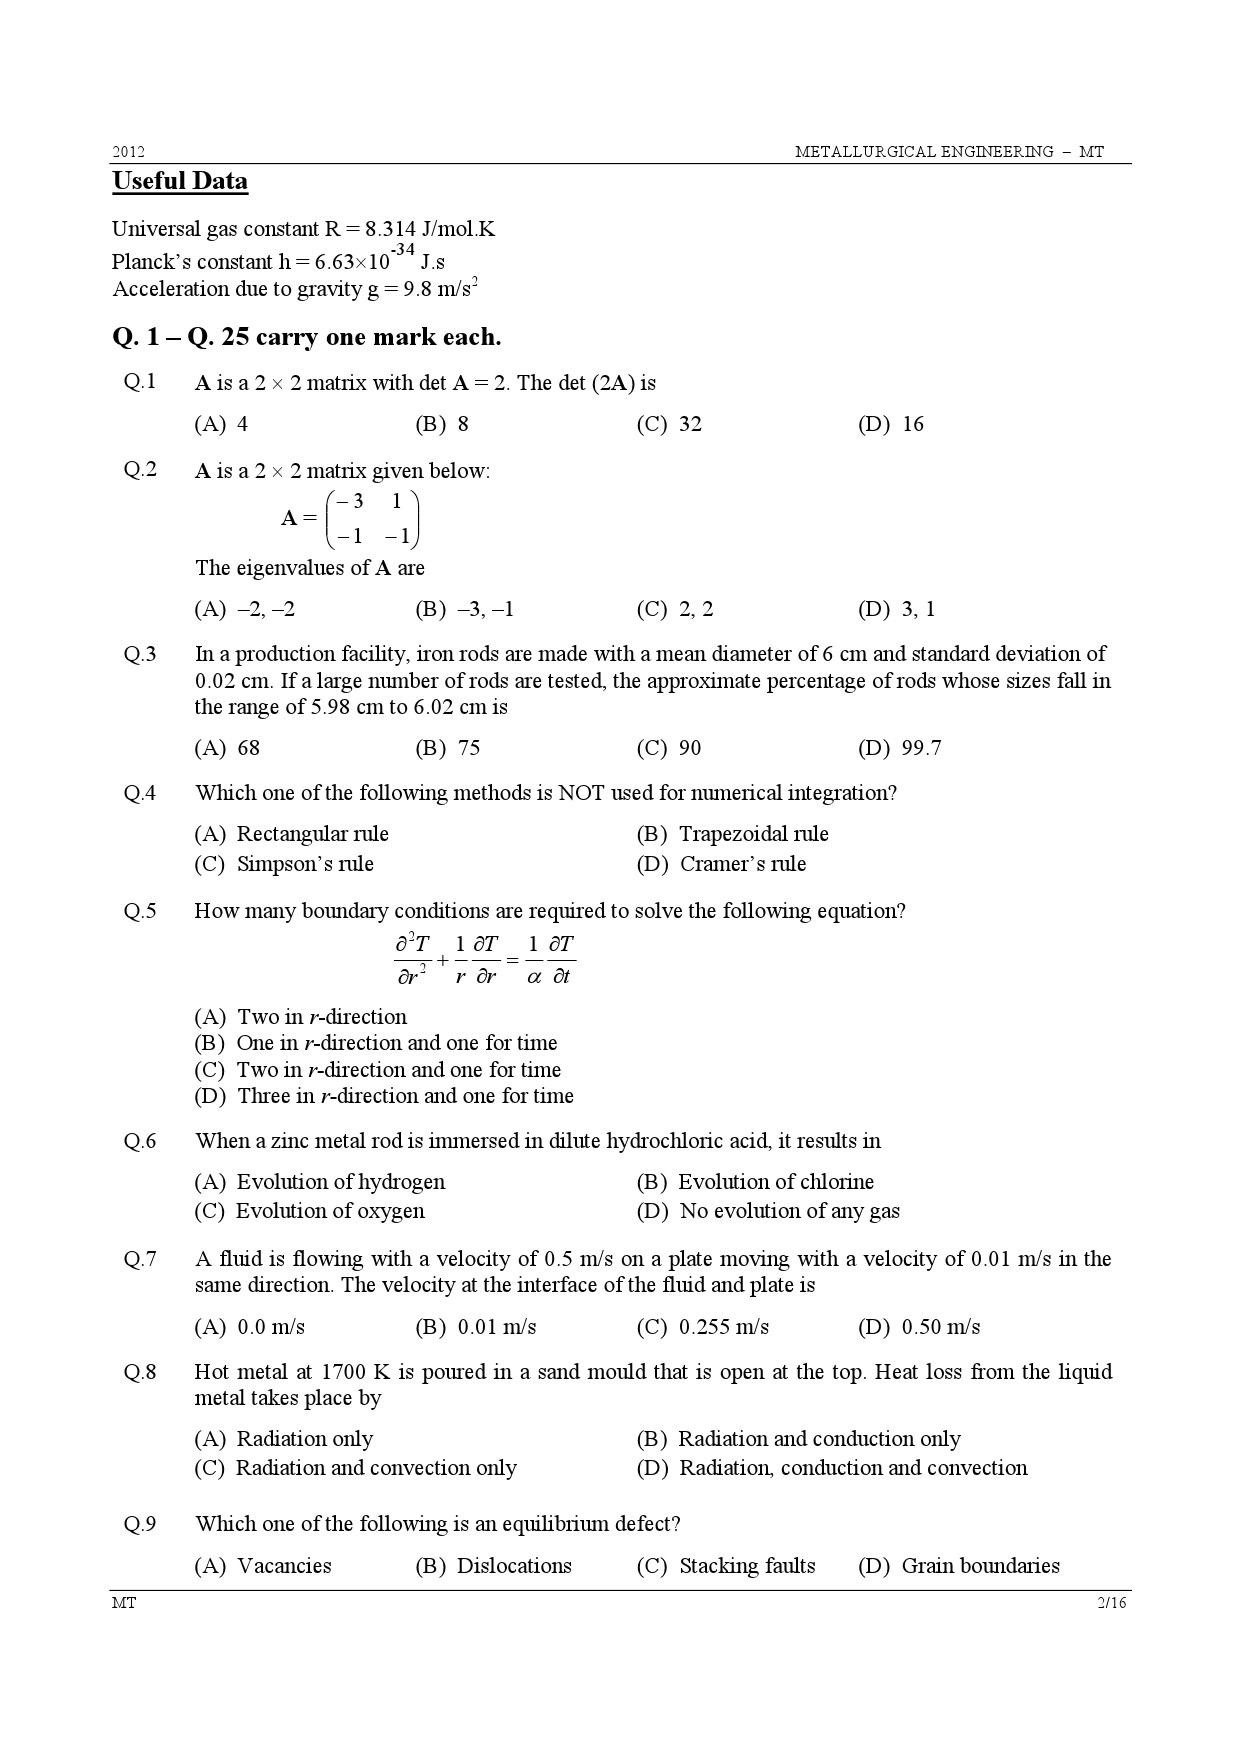 GATE Exam Question Paper 2012 Metallurgical Engineering 2